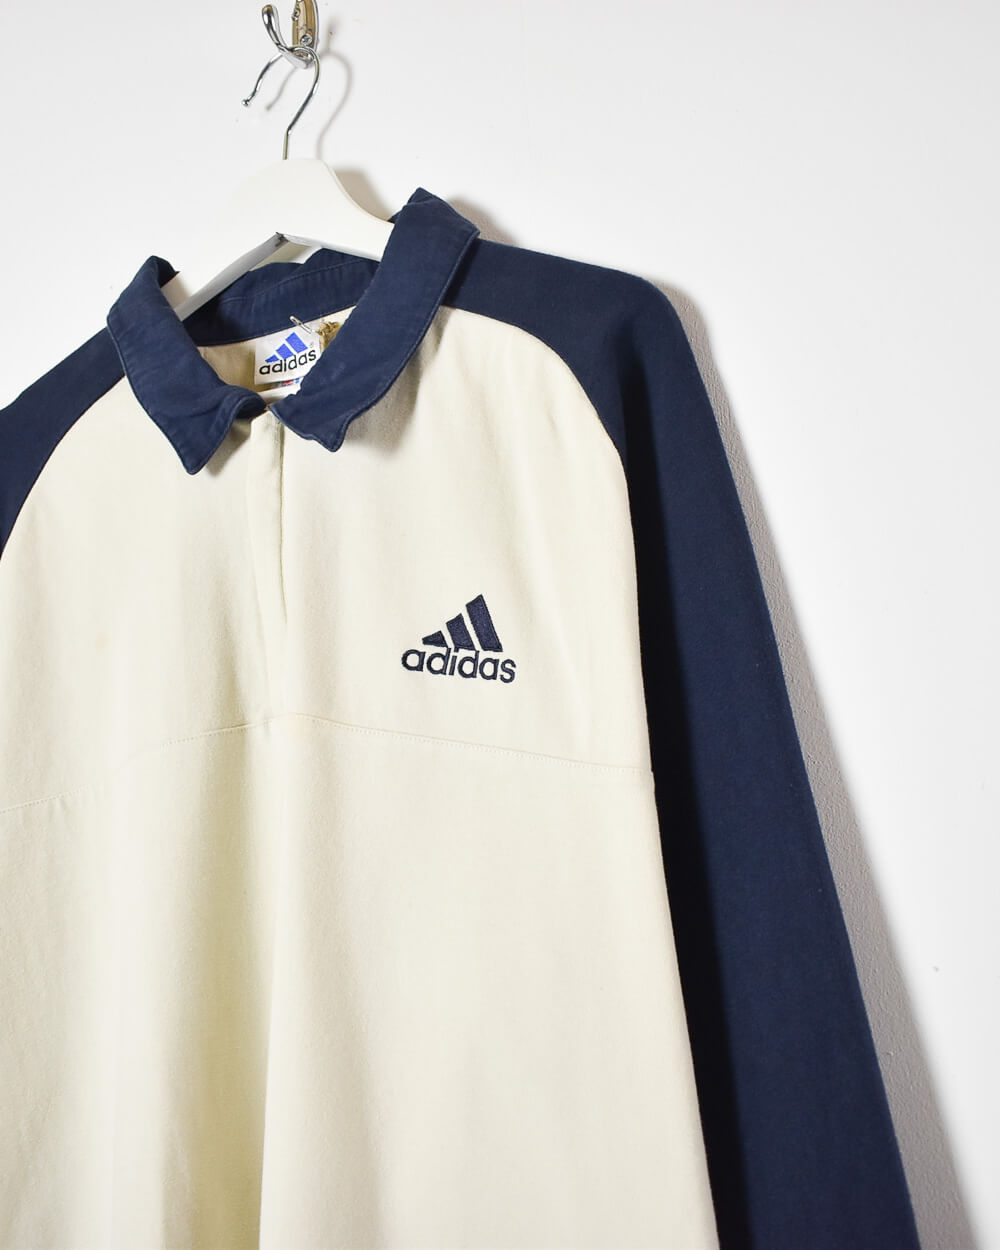 Neutral Adidas Rugby Shirt - X-Large